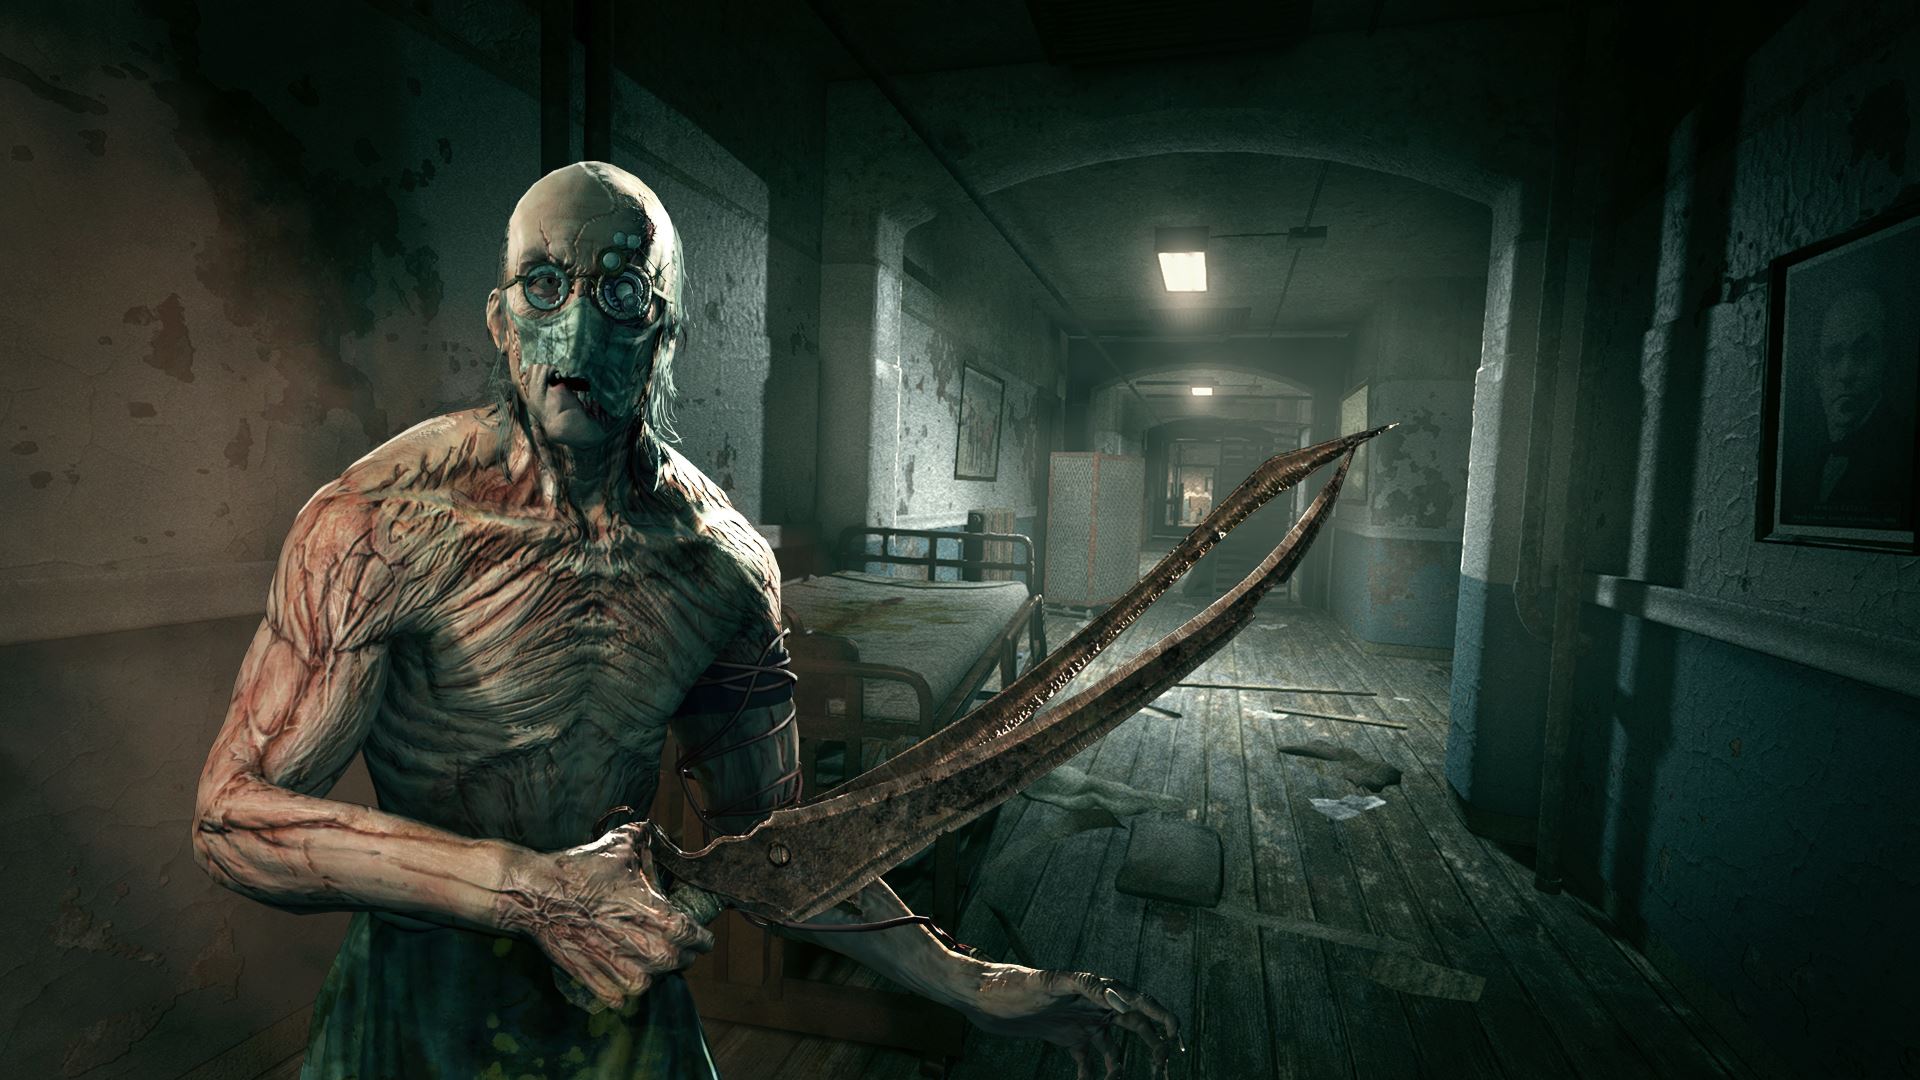 The Outlast Trials Gameplay Reveal